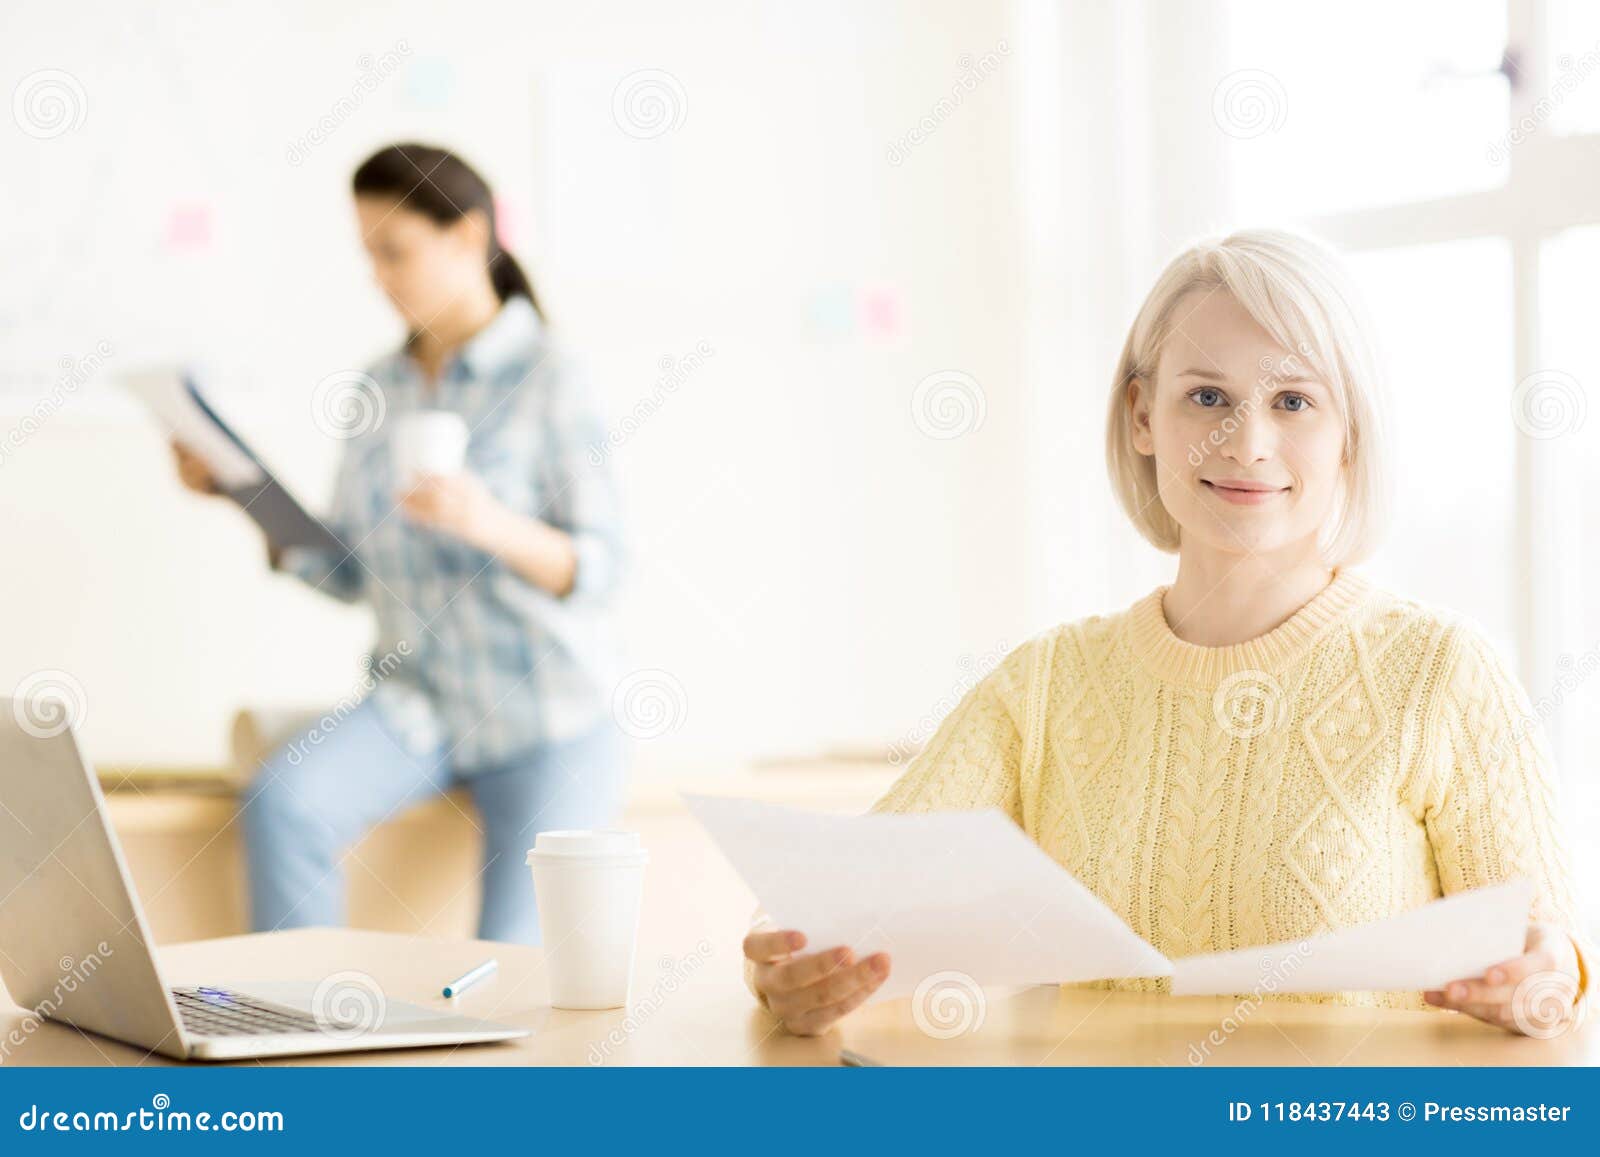 Women Sitting in Office Working Stock Image - Image of revision, pretty ...